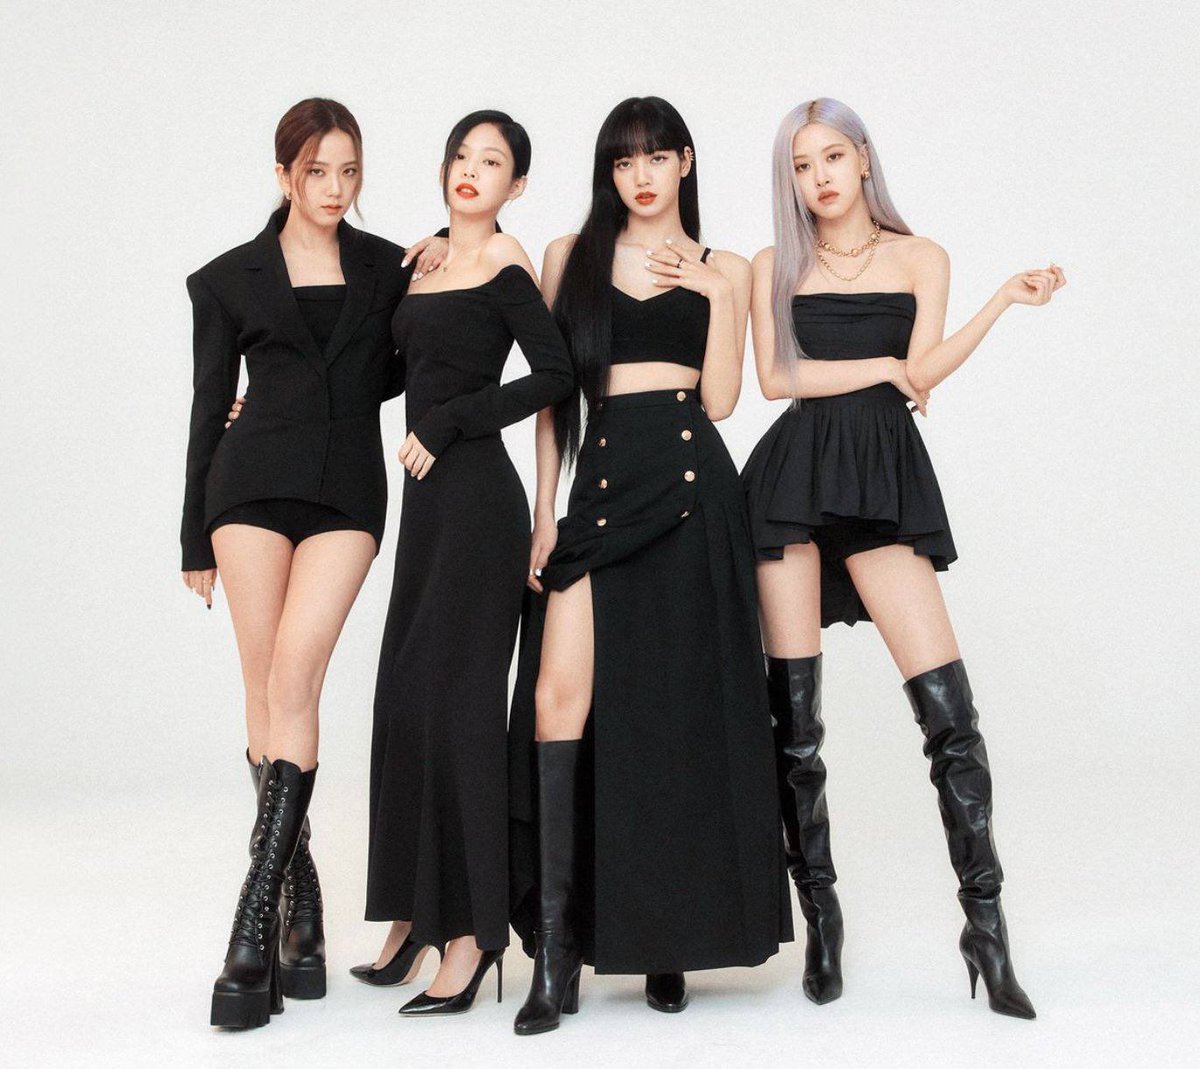 .@BLACKPINK’s “#LoveToHateMe” has surpassed 200 MILLION @Spotify streams, extending their record as the female group to have the most songs achieving this feat. on the platform’s history (18)! 

#THEALBUM  #블랙핑크 #BLACKPINK